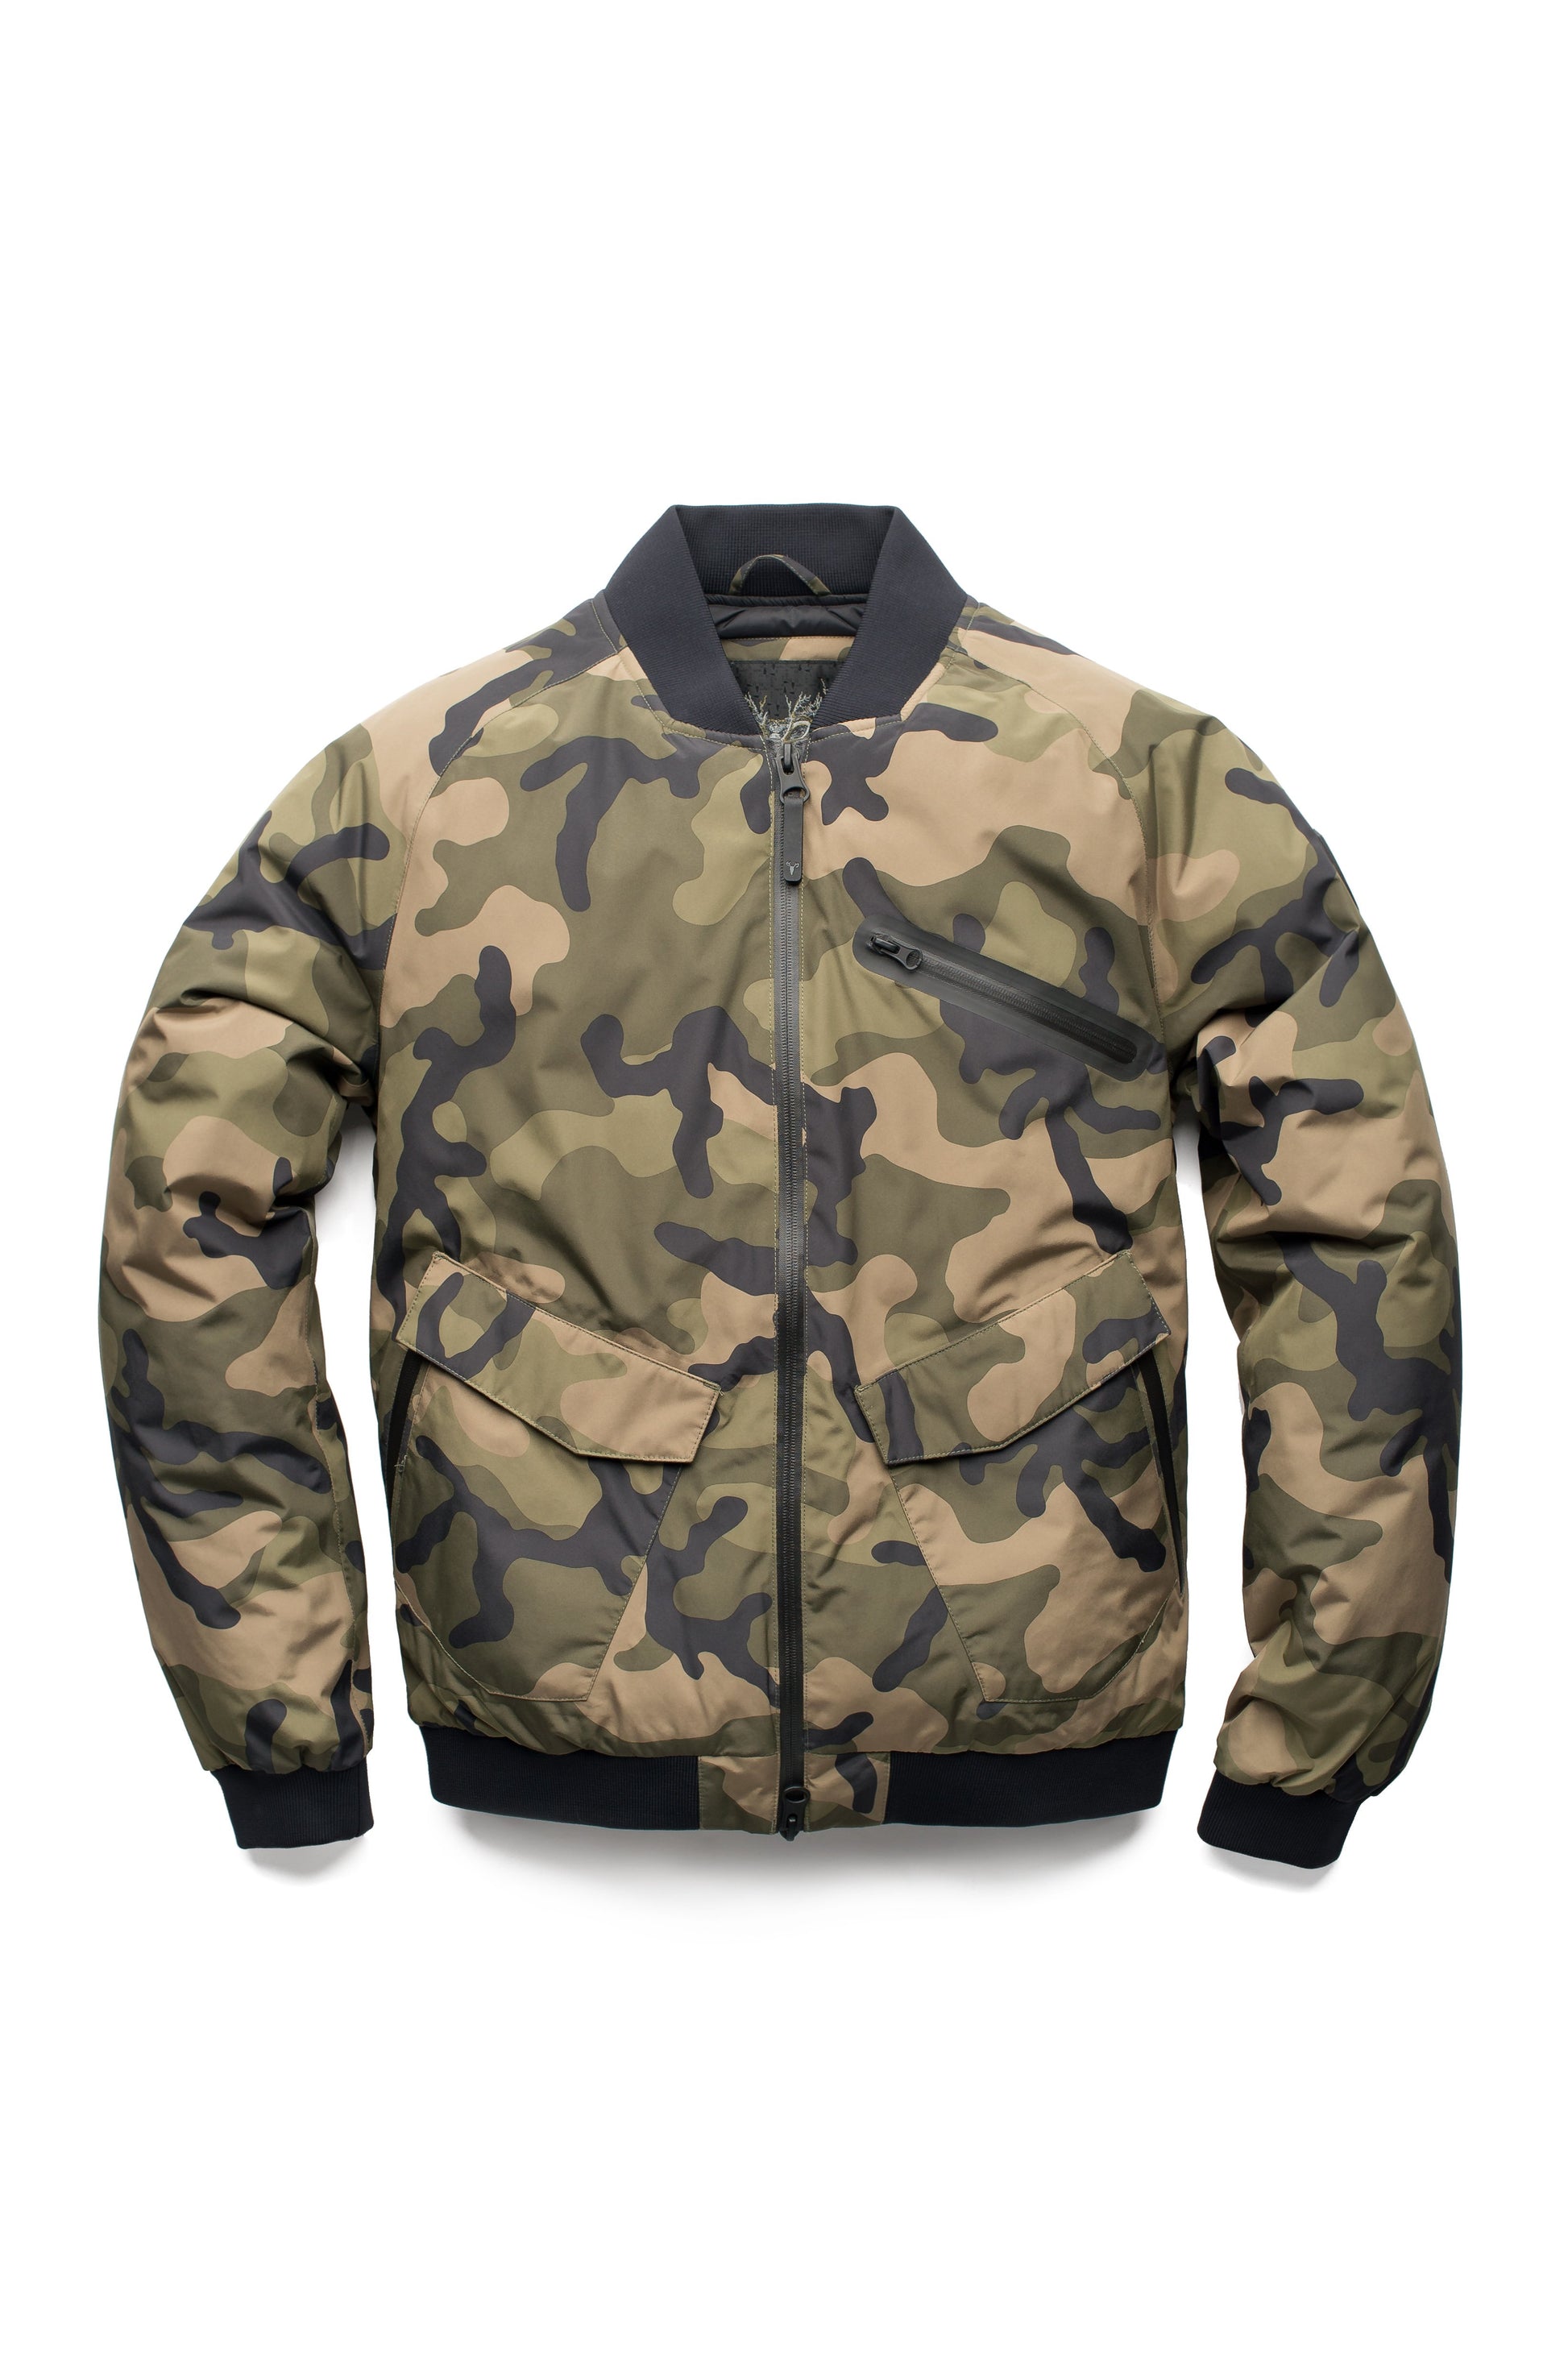 Men's classic crew neck lightweight down filled bomber with exposed zipper in Camo